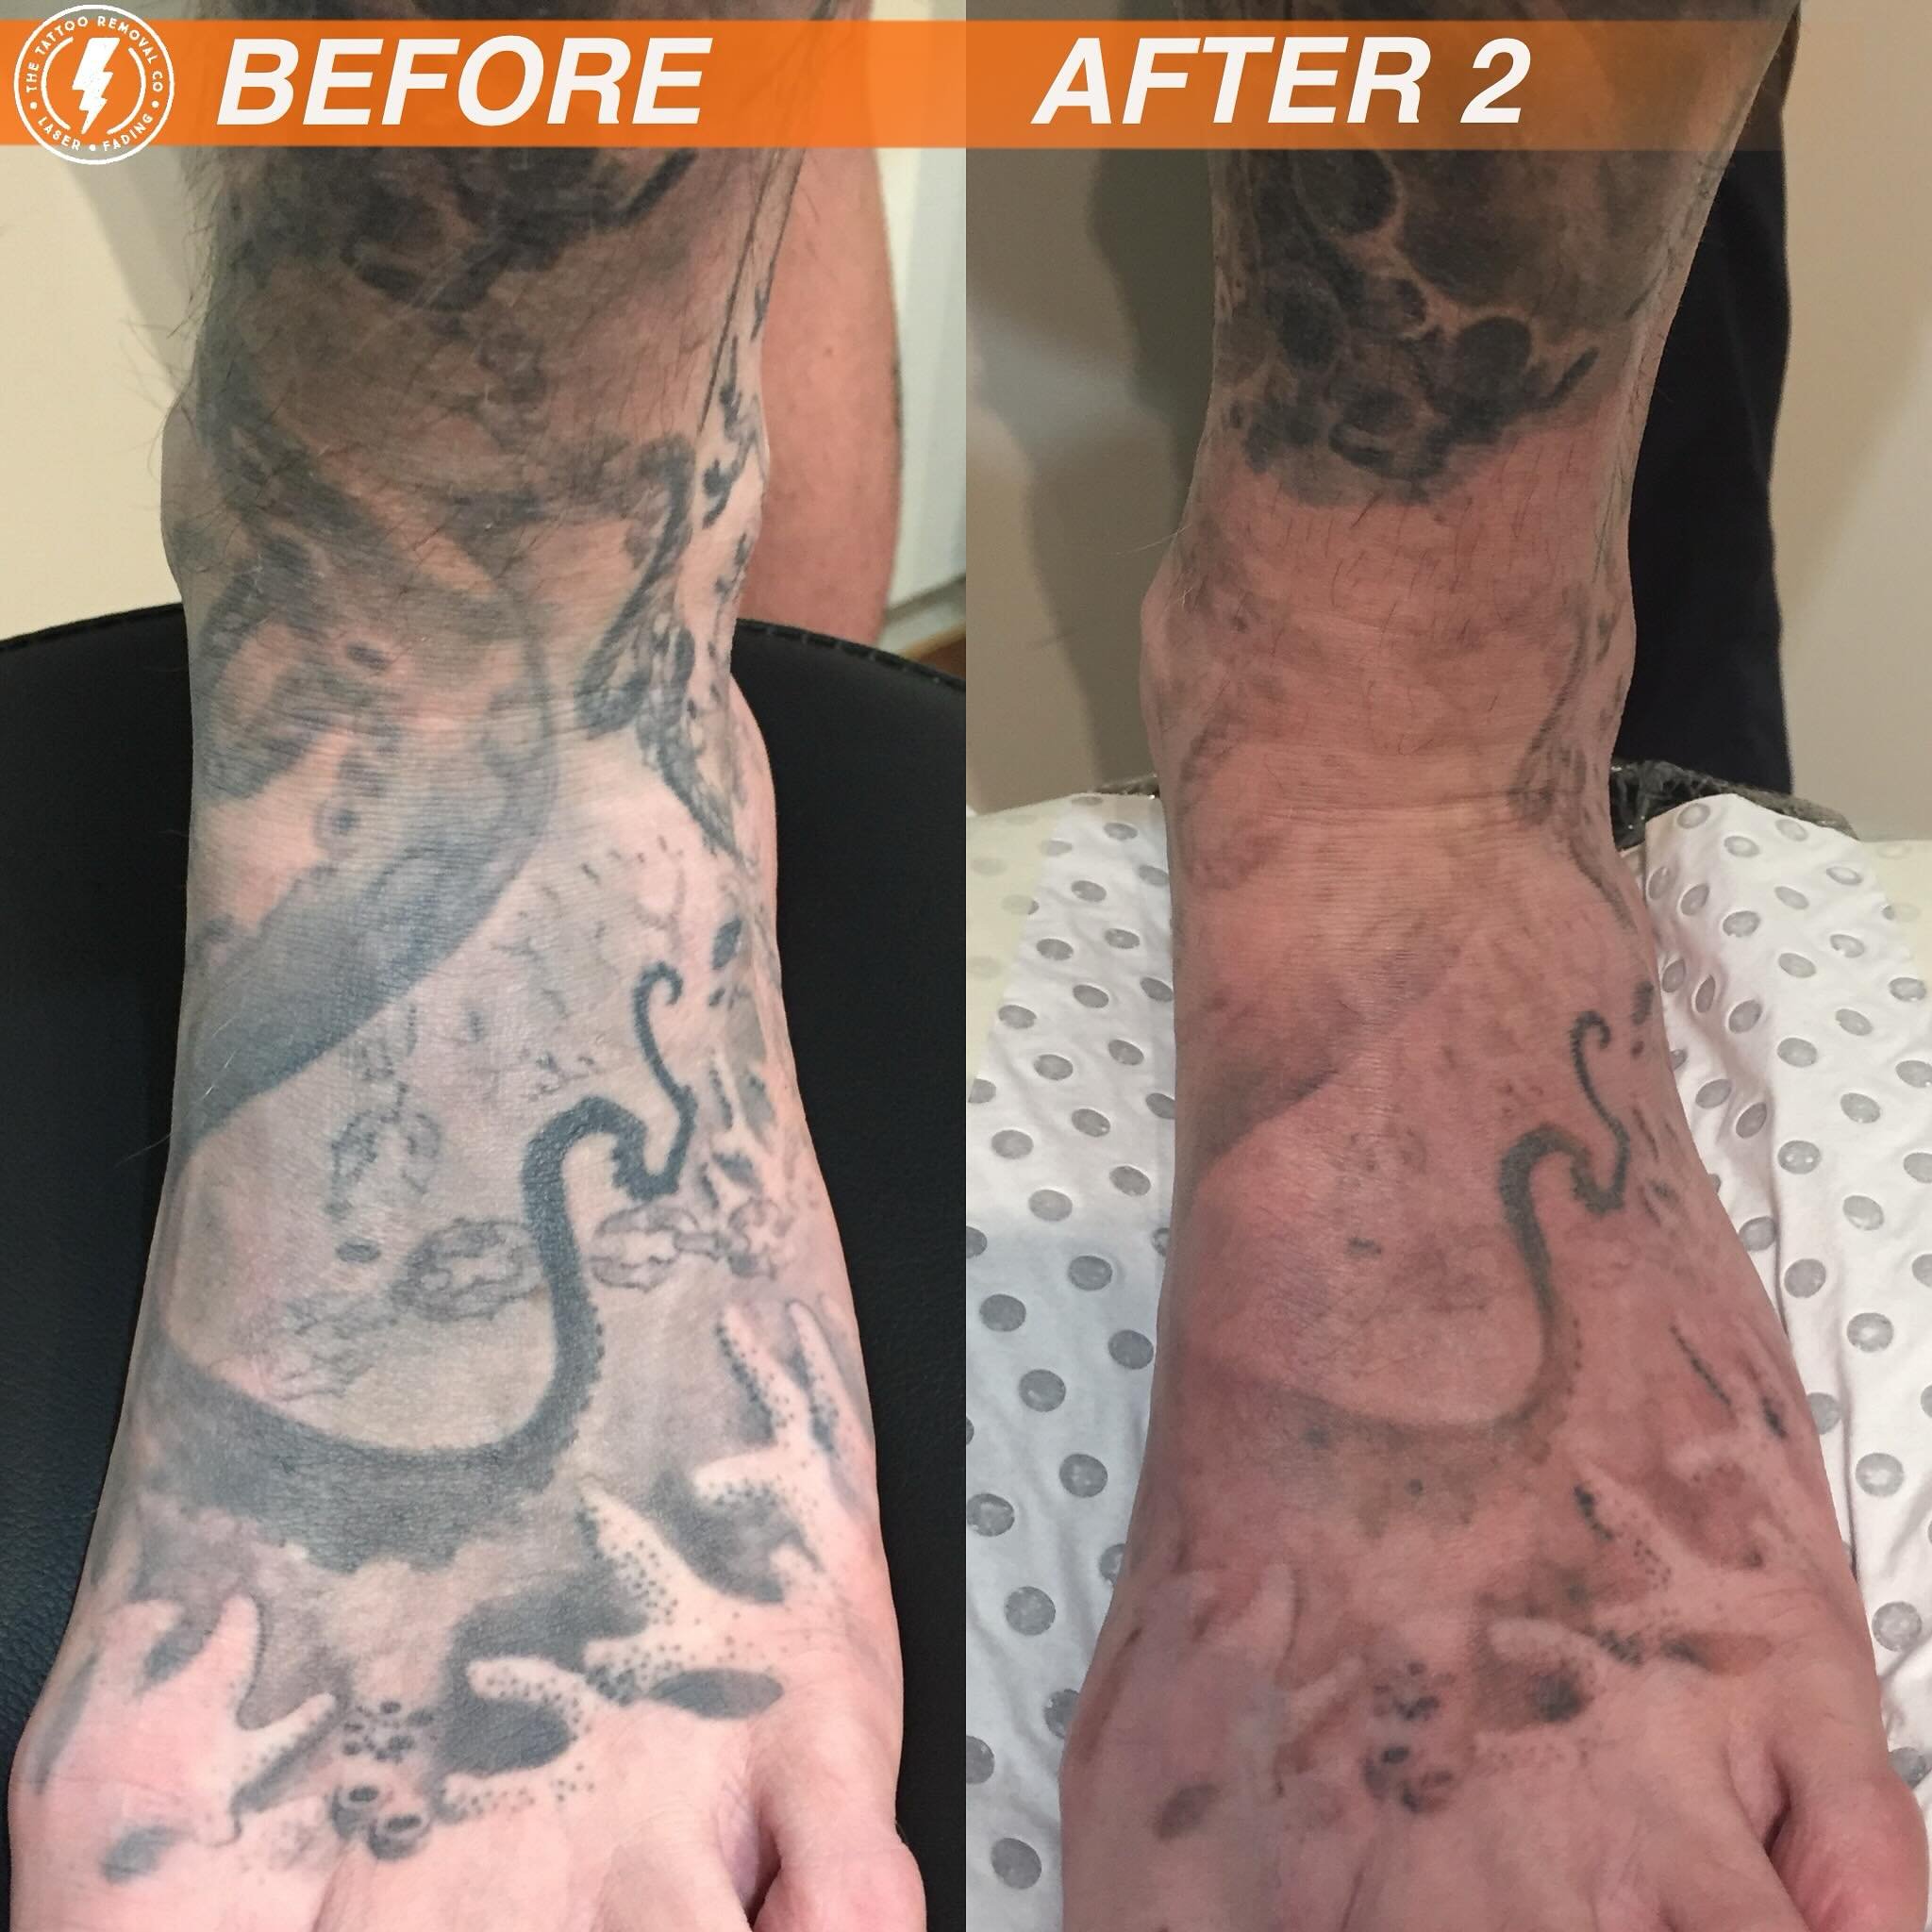 BEFORE/AFTER 2 TREATMENTS💥

Oohhh Aaaarrrrrr it&rsquo;s the kraken 🦑

⚡️Fabulous result so far. These are the results you get with our experienced and knowledgeable Laser Technician @philly_ttrc_pagdin ⚡️

Consultations are FREE please don&rsquo;t 